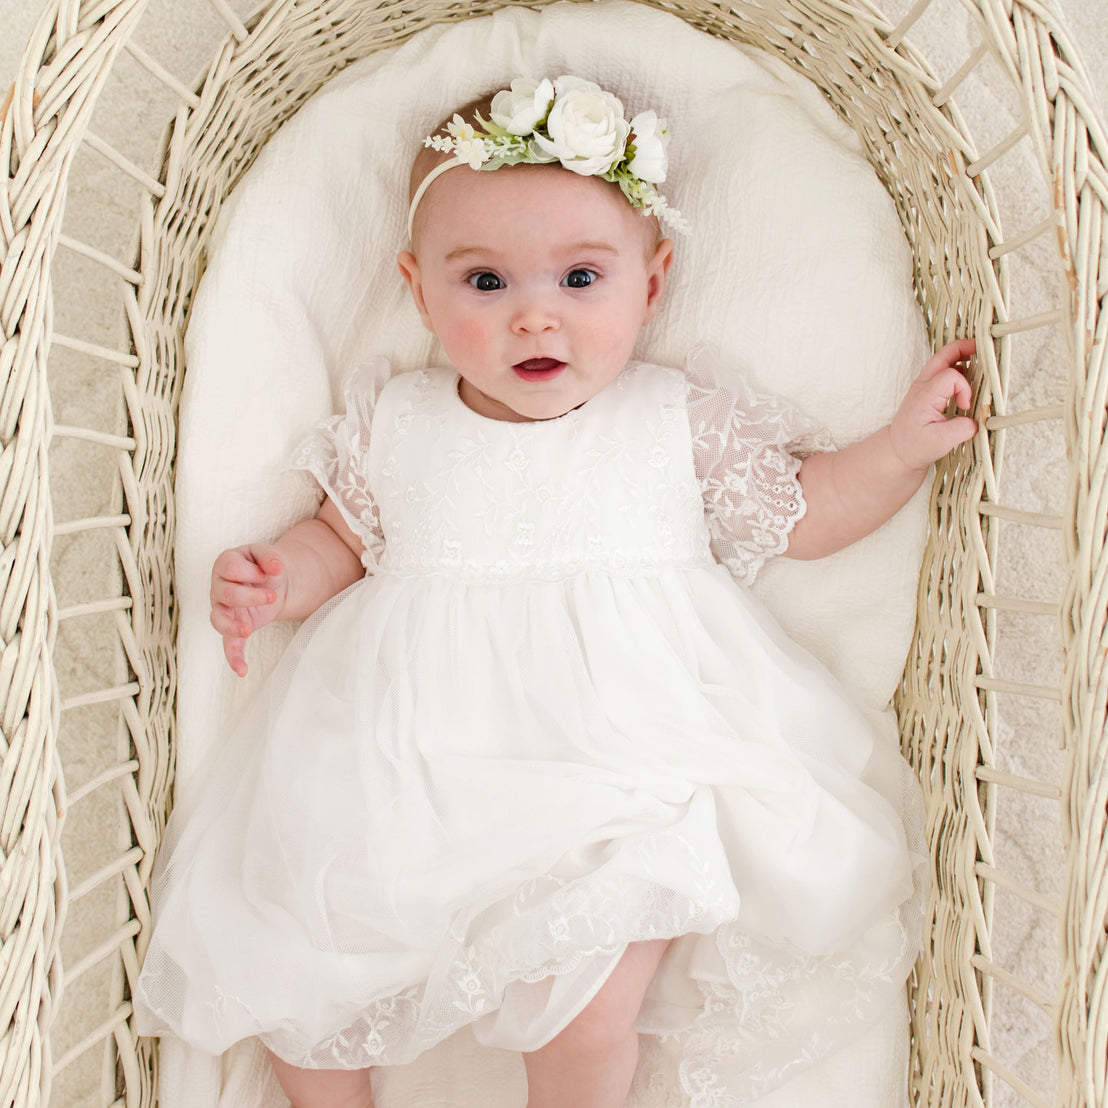 baby girl photographed in crib wearing the Ella baptism lace dress